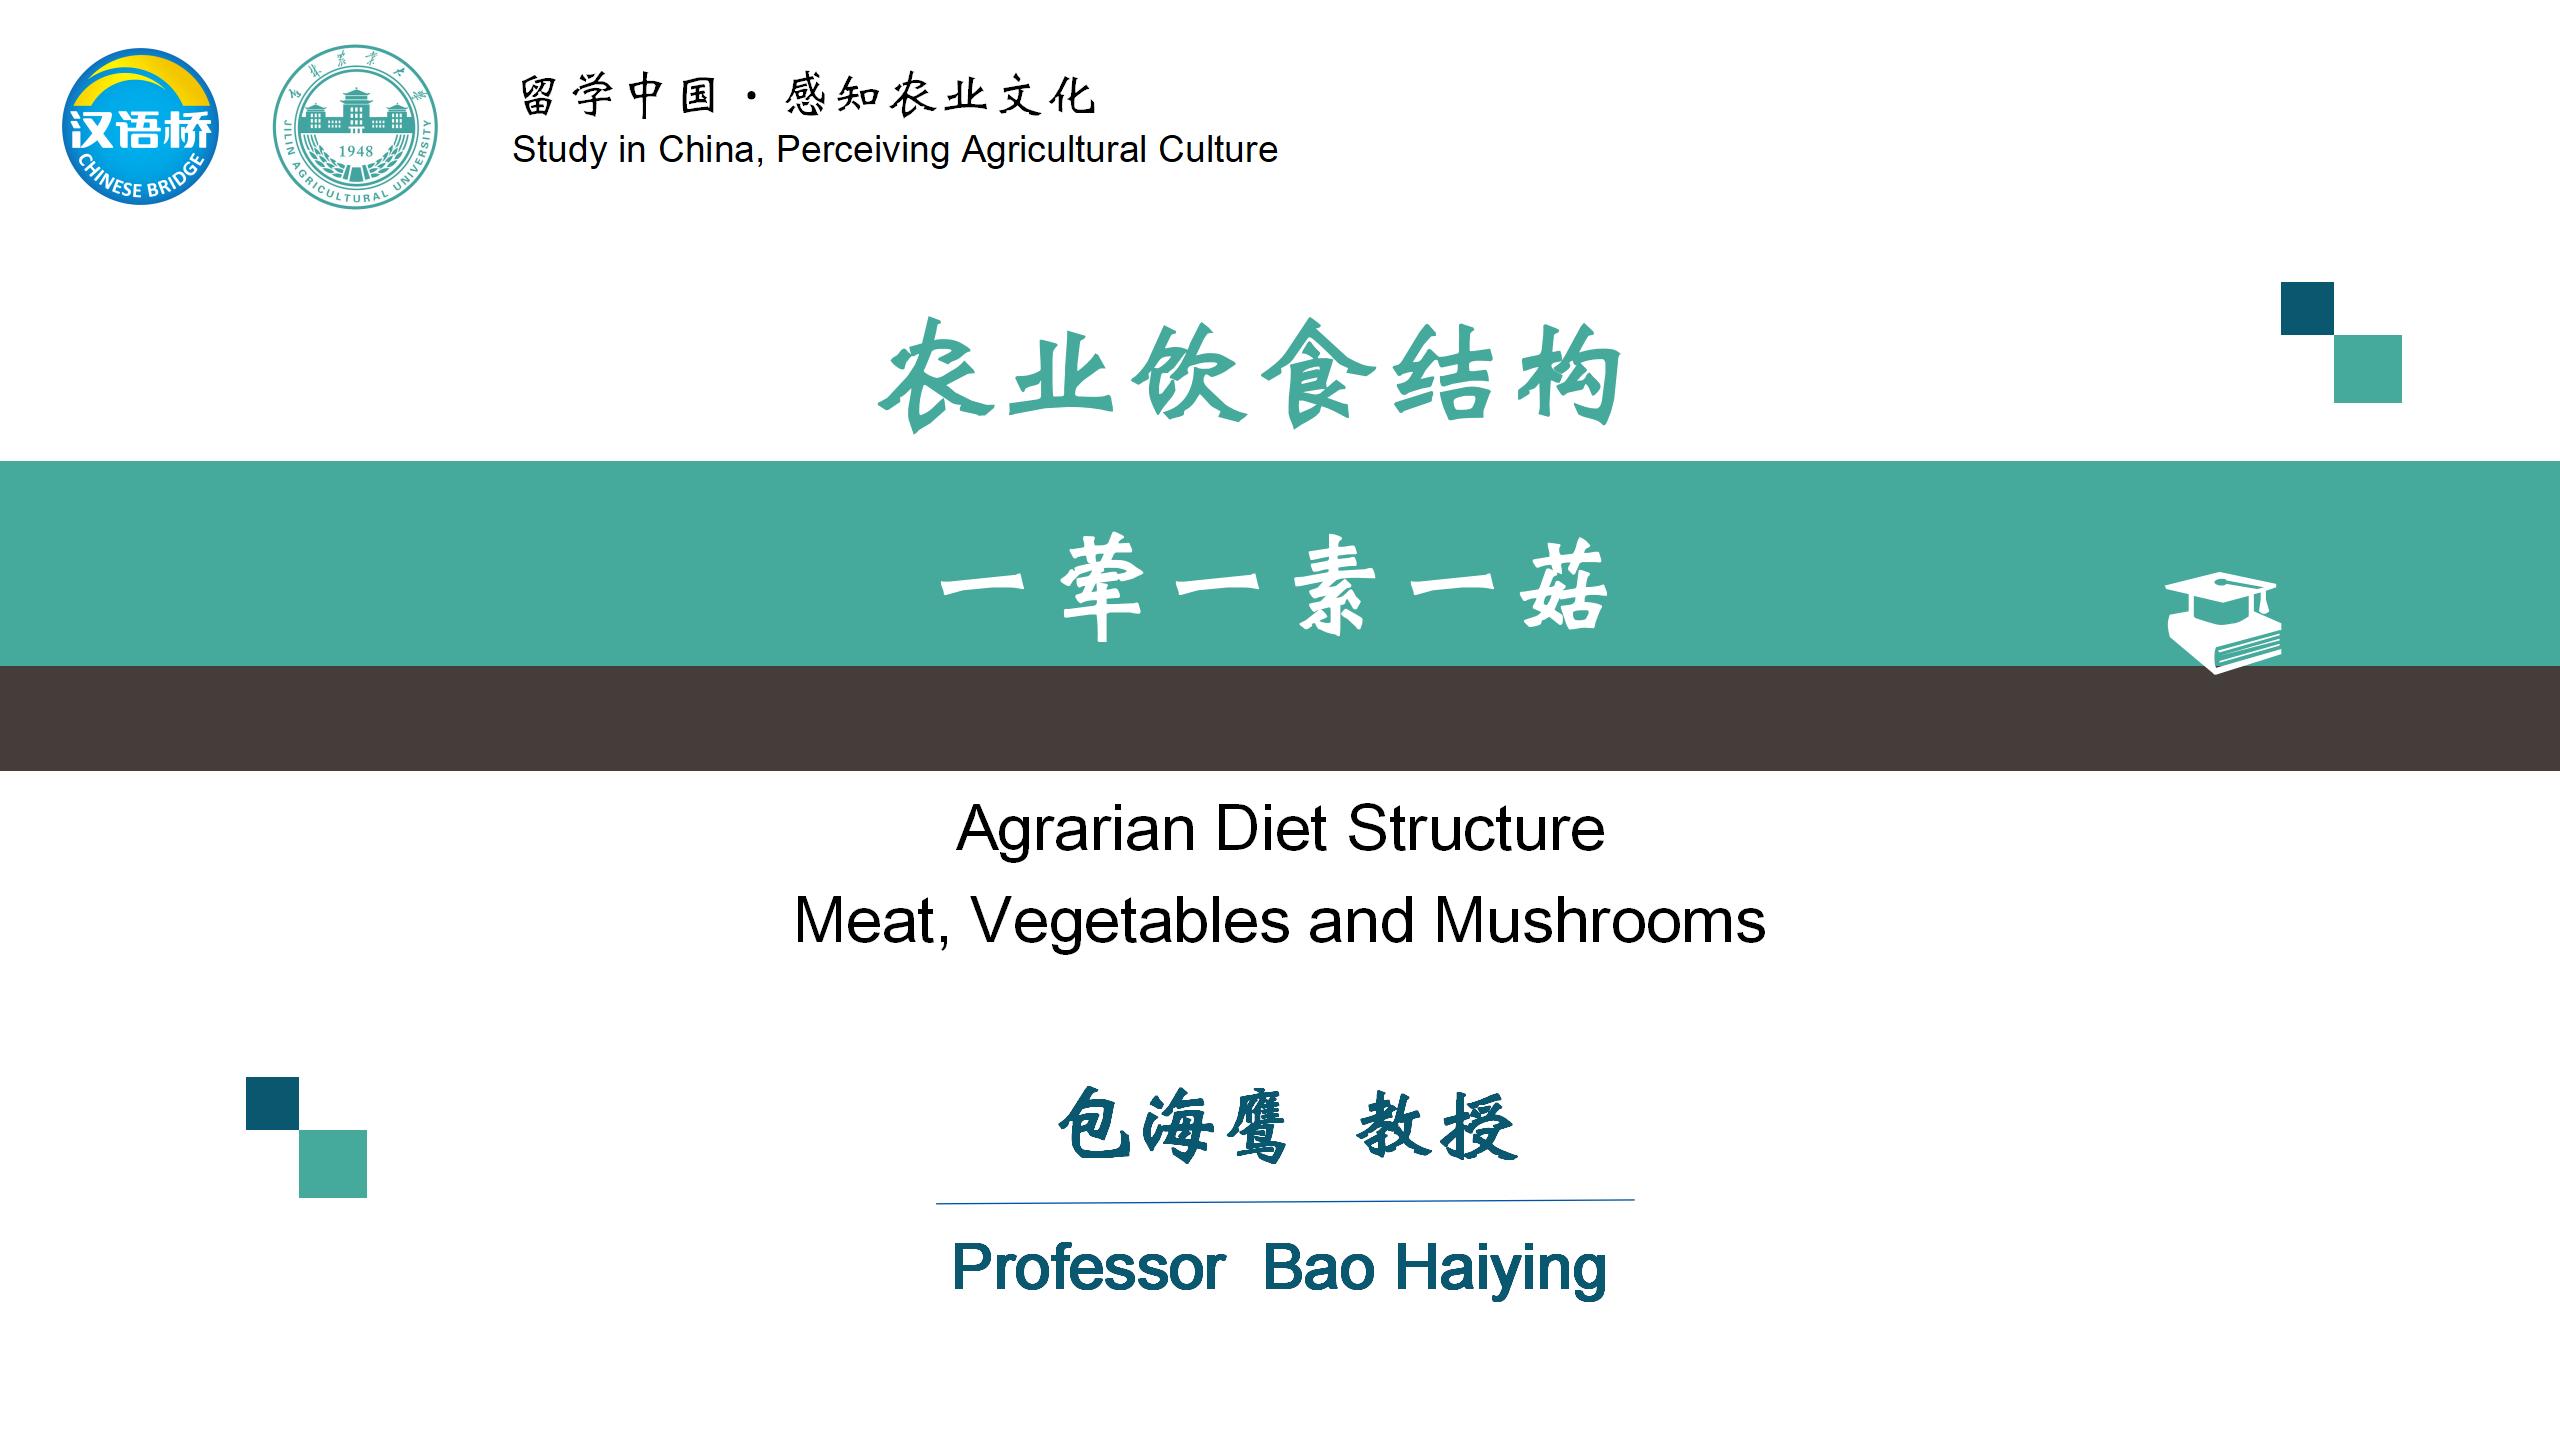 Agrarian Diet Structure: Meat, Vegetables and Mushrooms